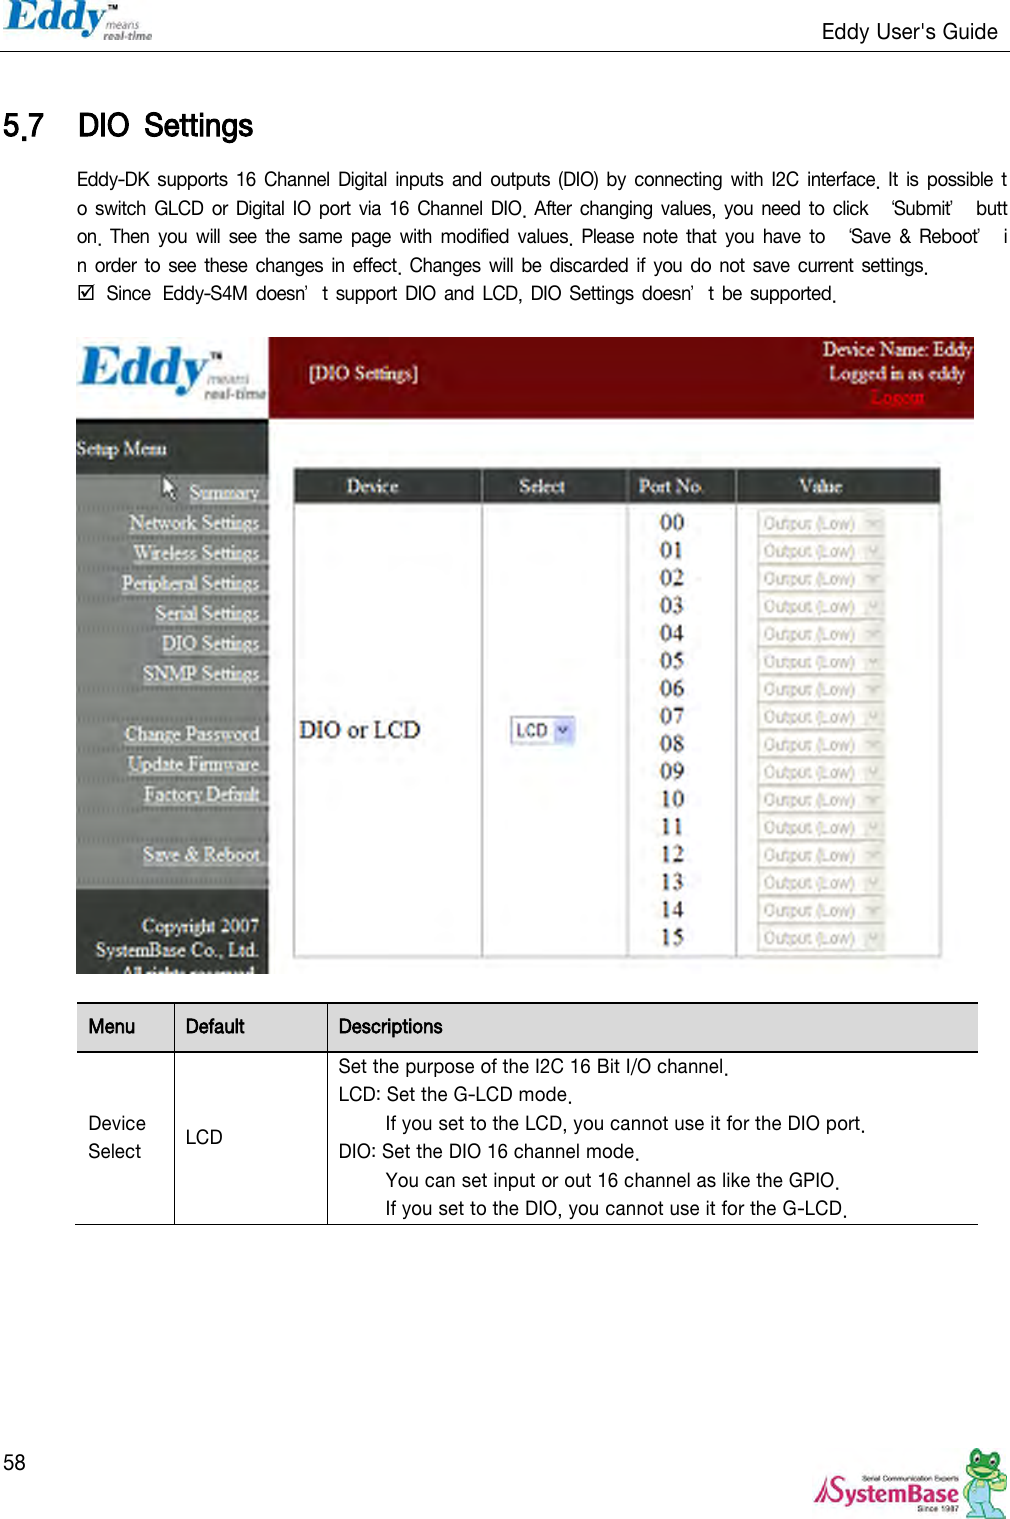                                                                   Eddy User&apos;s Guide   58  5.7 DIO  Settings Eddy-DK supports  16  Channel  Digital inputs  and outputs (DIO) by connecting  with I2C  interface.  It  is possible  to switch GLCD or  Digital IO port via 16 Channel  DIO. After  changing  values, you need to  click  ‘Submit’  button. Then  you will  see the  same page with  modified values. Please note that you have  to  ‘Save &amp;  Reboot’  in  order to  see  these changes  in  effect. Changes  will be discarded if you do  not save current settings.  Since Eddy-S4M doesn’t support DIO  and  LCD,  DIO Settings  doesn’t be  supported.    Menu Default Descriptions Device Select LCD Set the purpose of the I2C 16 Bit I/O channel. LCD: Set the G-LCD mode. If you set to the LCD, you cannot use it for the DIO port. DIO: Set the DIO 16 channel mode. You can set input or out 16 channel as like the GPIO. If you set to the DIO, you cannot use it for the G-LCD.  